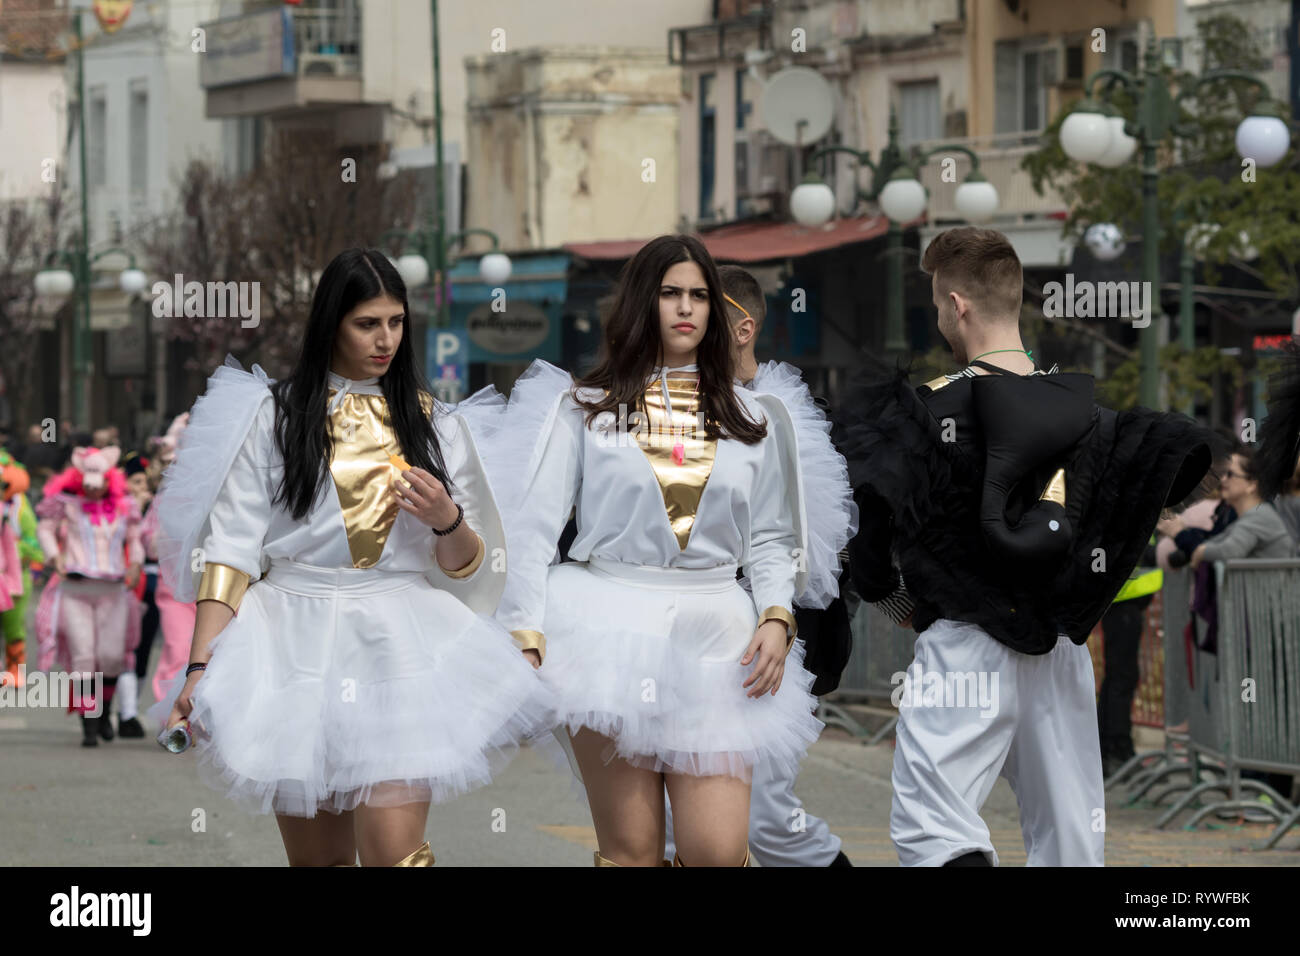 XANTHI, GREECE - MARCH 10, 2019: Masquerade participants march and have fun in colorful costumes. Small and big groups of Greek people parade annually Stock Photo